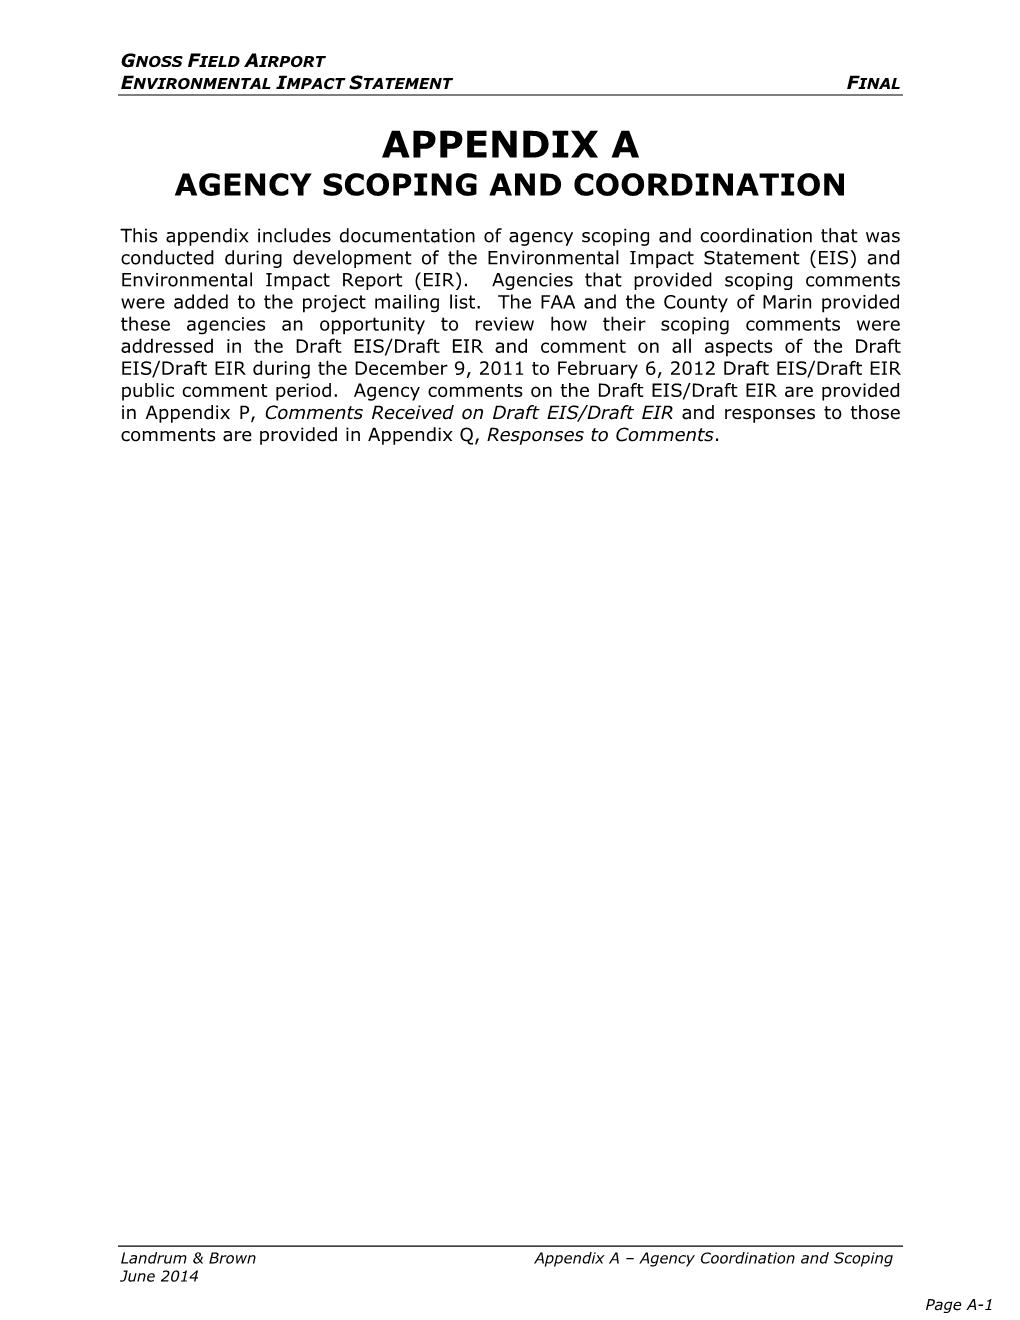 Appendix a Agency Scoping and Coordination